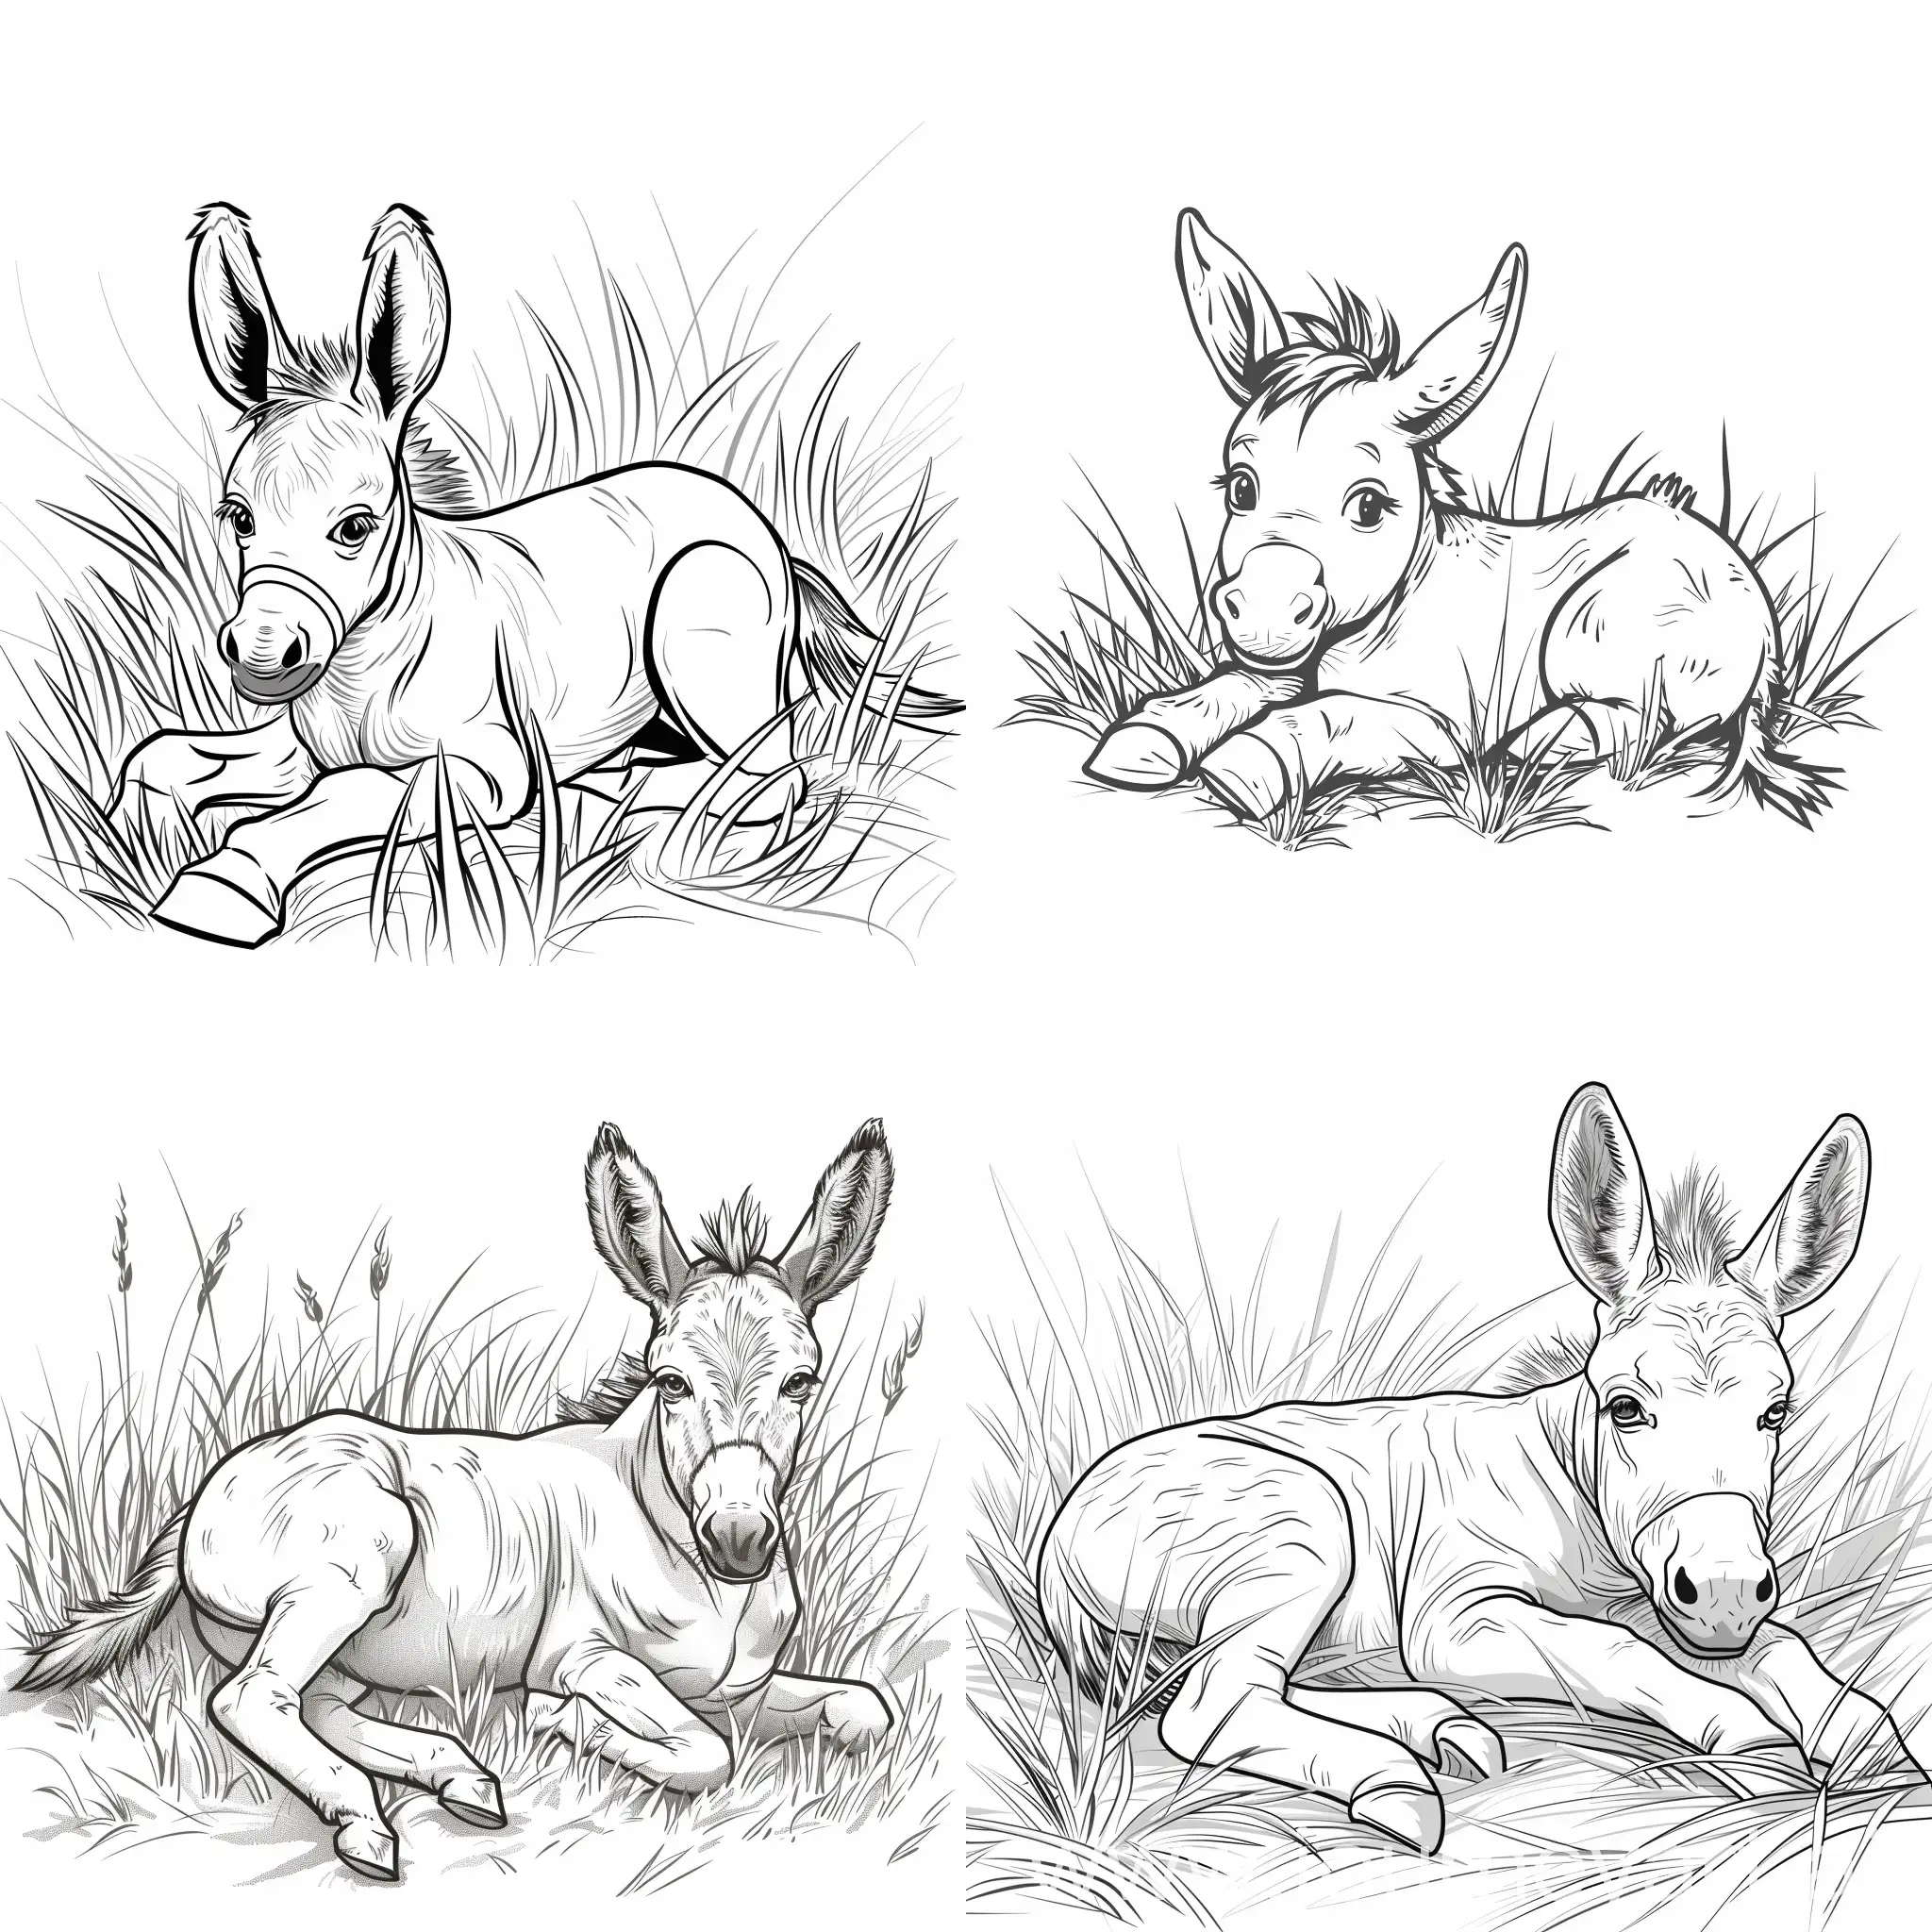 Adorable-Donkey-Coloring-Page-Cute-and-Simple-GrassLying-Illustration